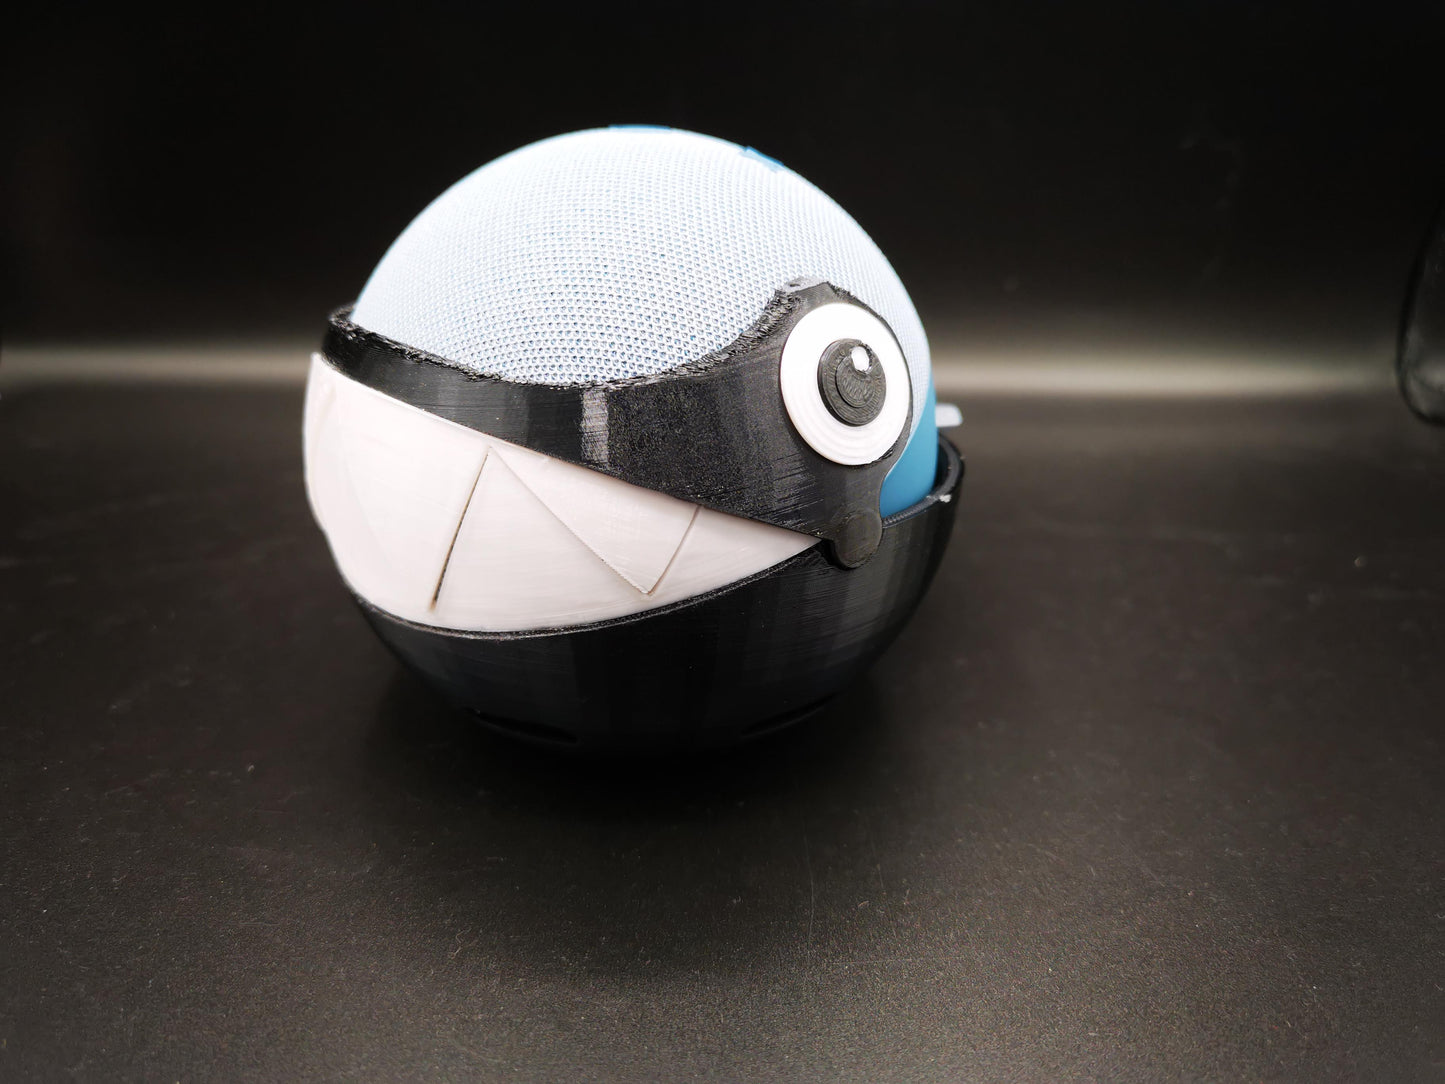 Chain Chomp Alexa Echo holder from a front side angle close up